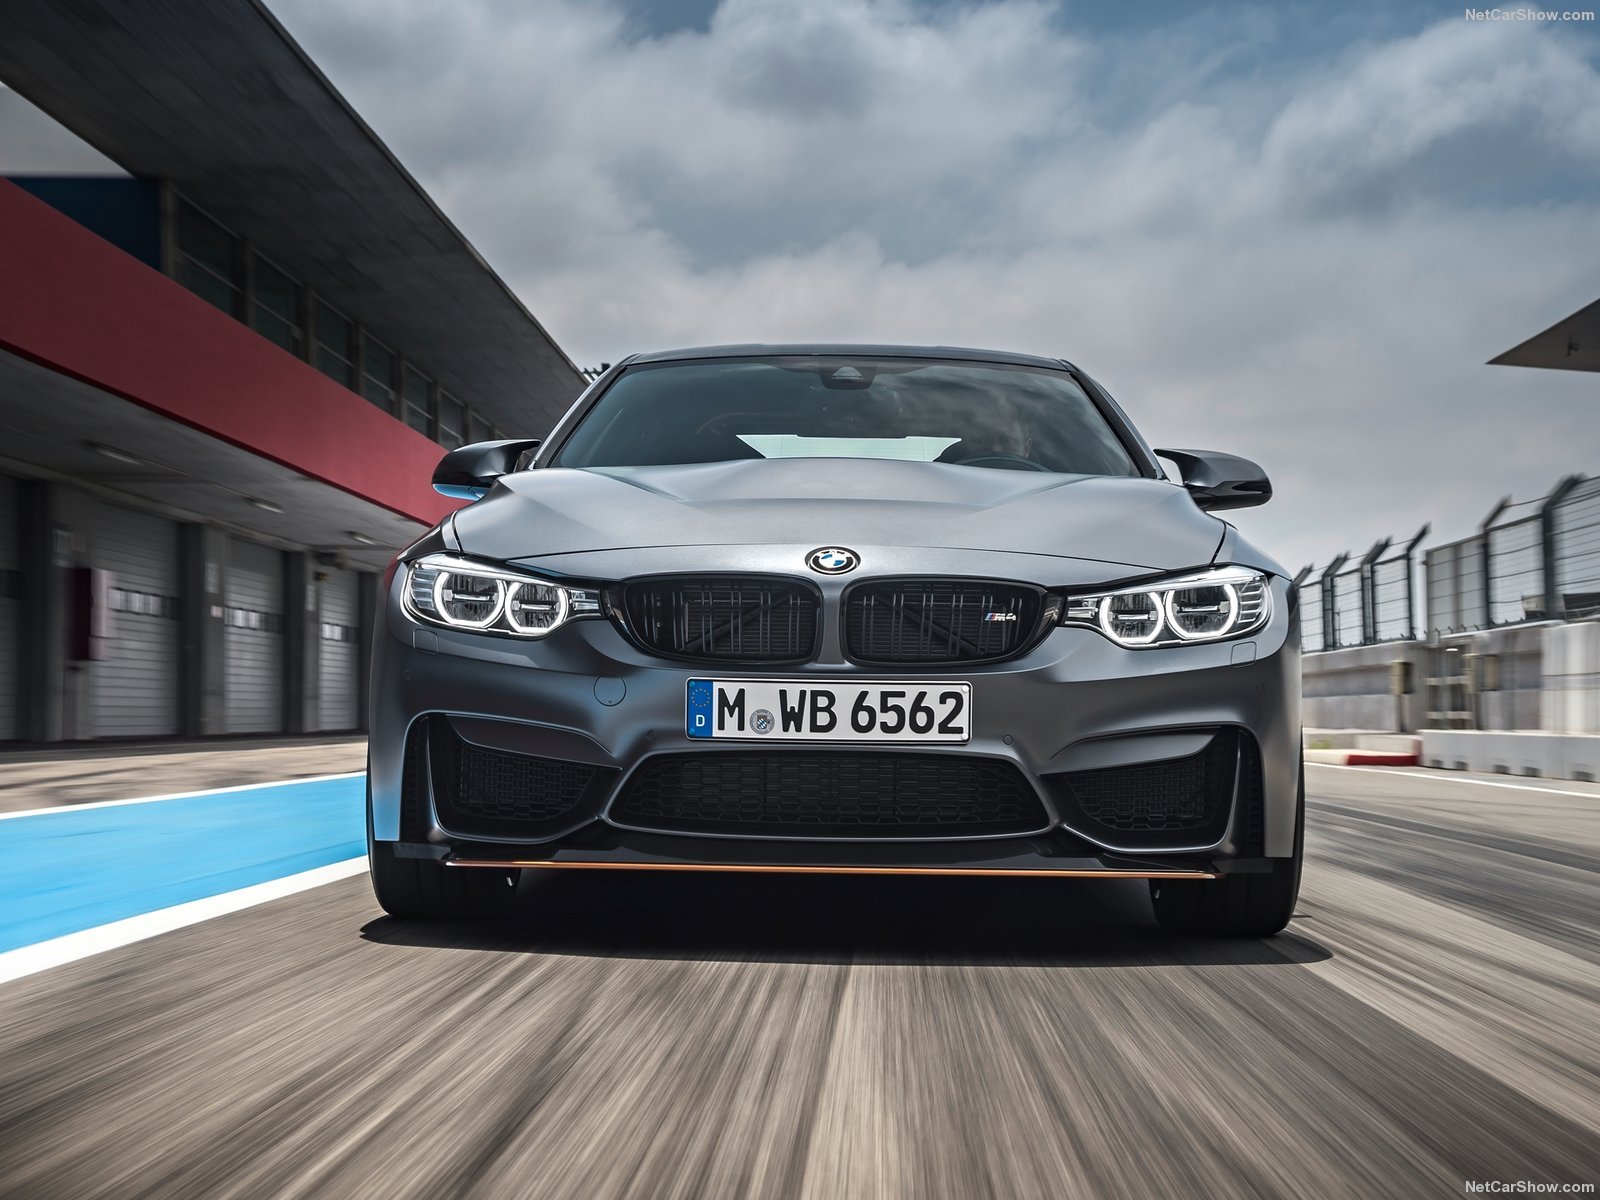 bmw , M4, Gts, Cars, Coupe, 2016 Wallpaper